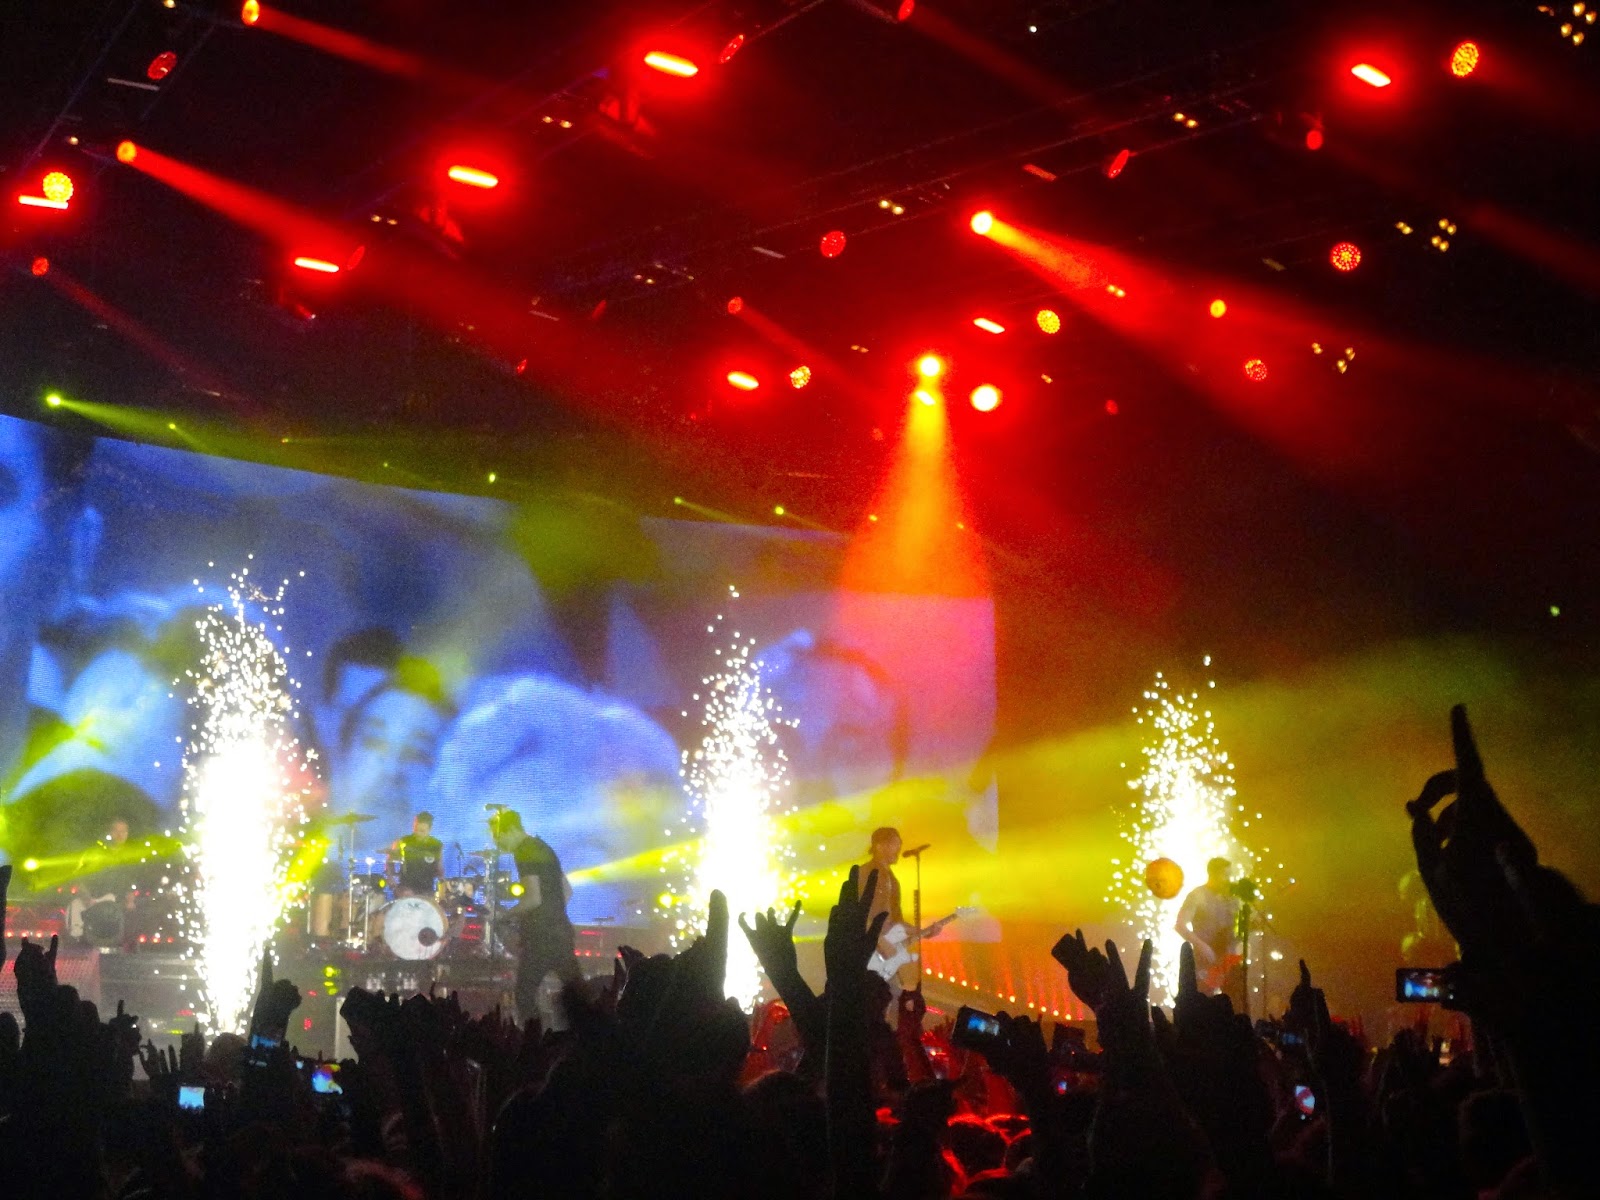 All Time Low performing live in concert in Glasgow Hydro